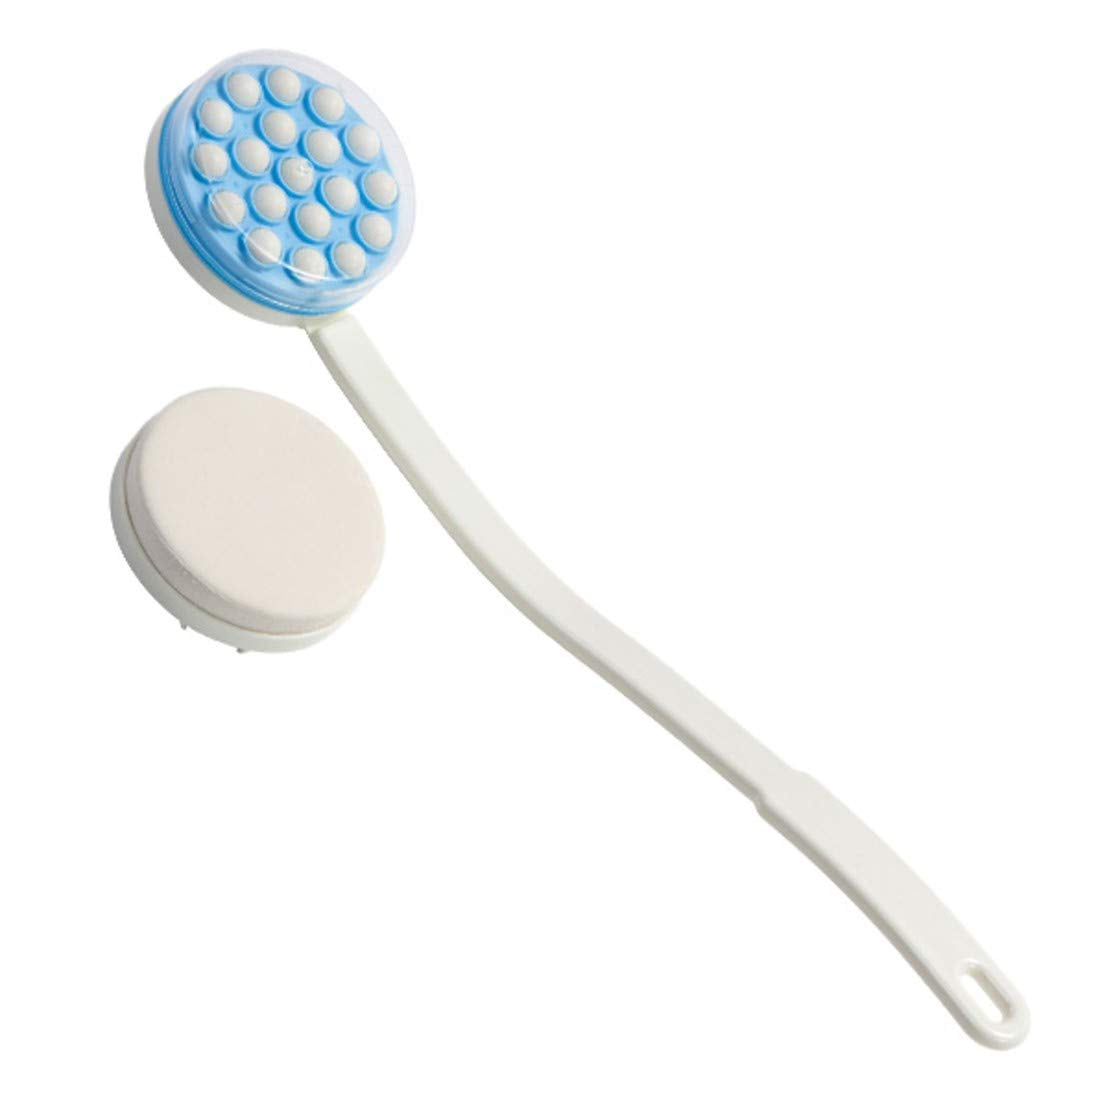 Sammons Preston Lotion Applicator with Massage Head, Long Handle and Foam Massaging for Back, Easily Apply Lotions, Creams, Oils, Pain Relief Gel, Suncreen, Mobility Aid